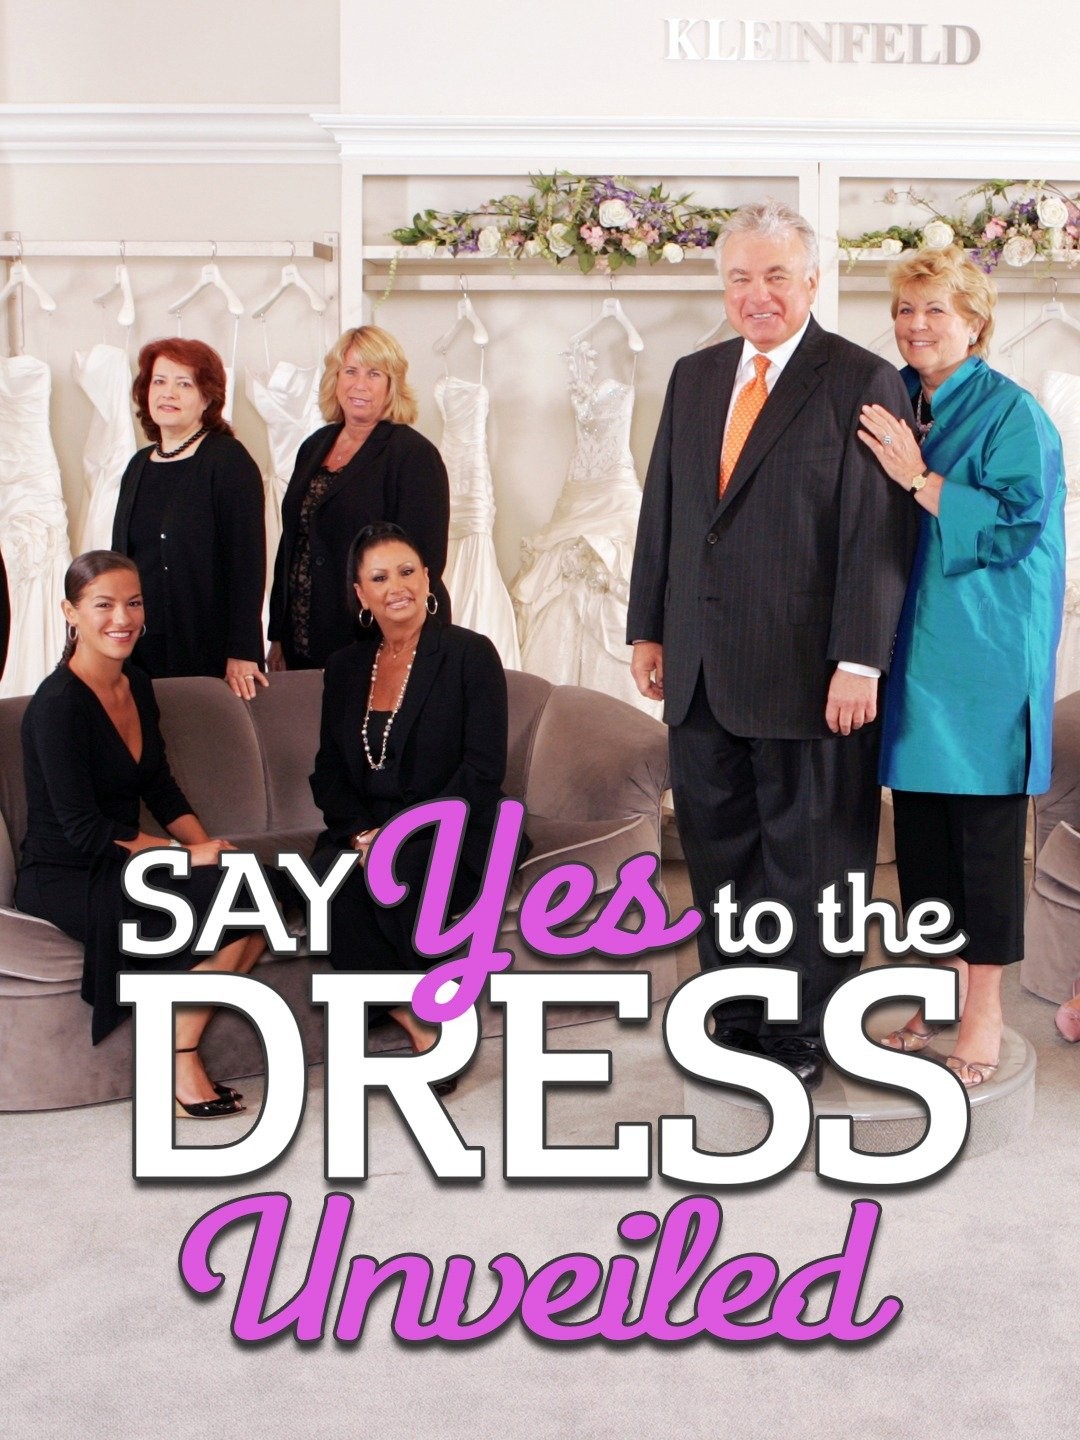 say yes to the dress cast